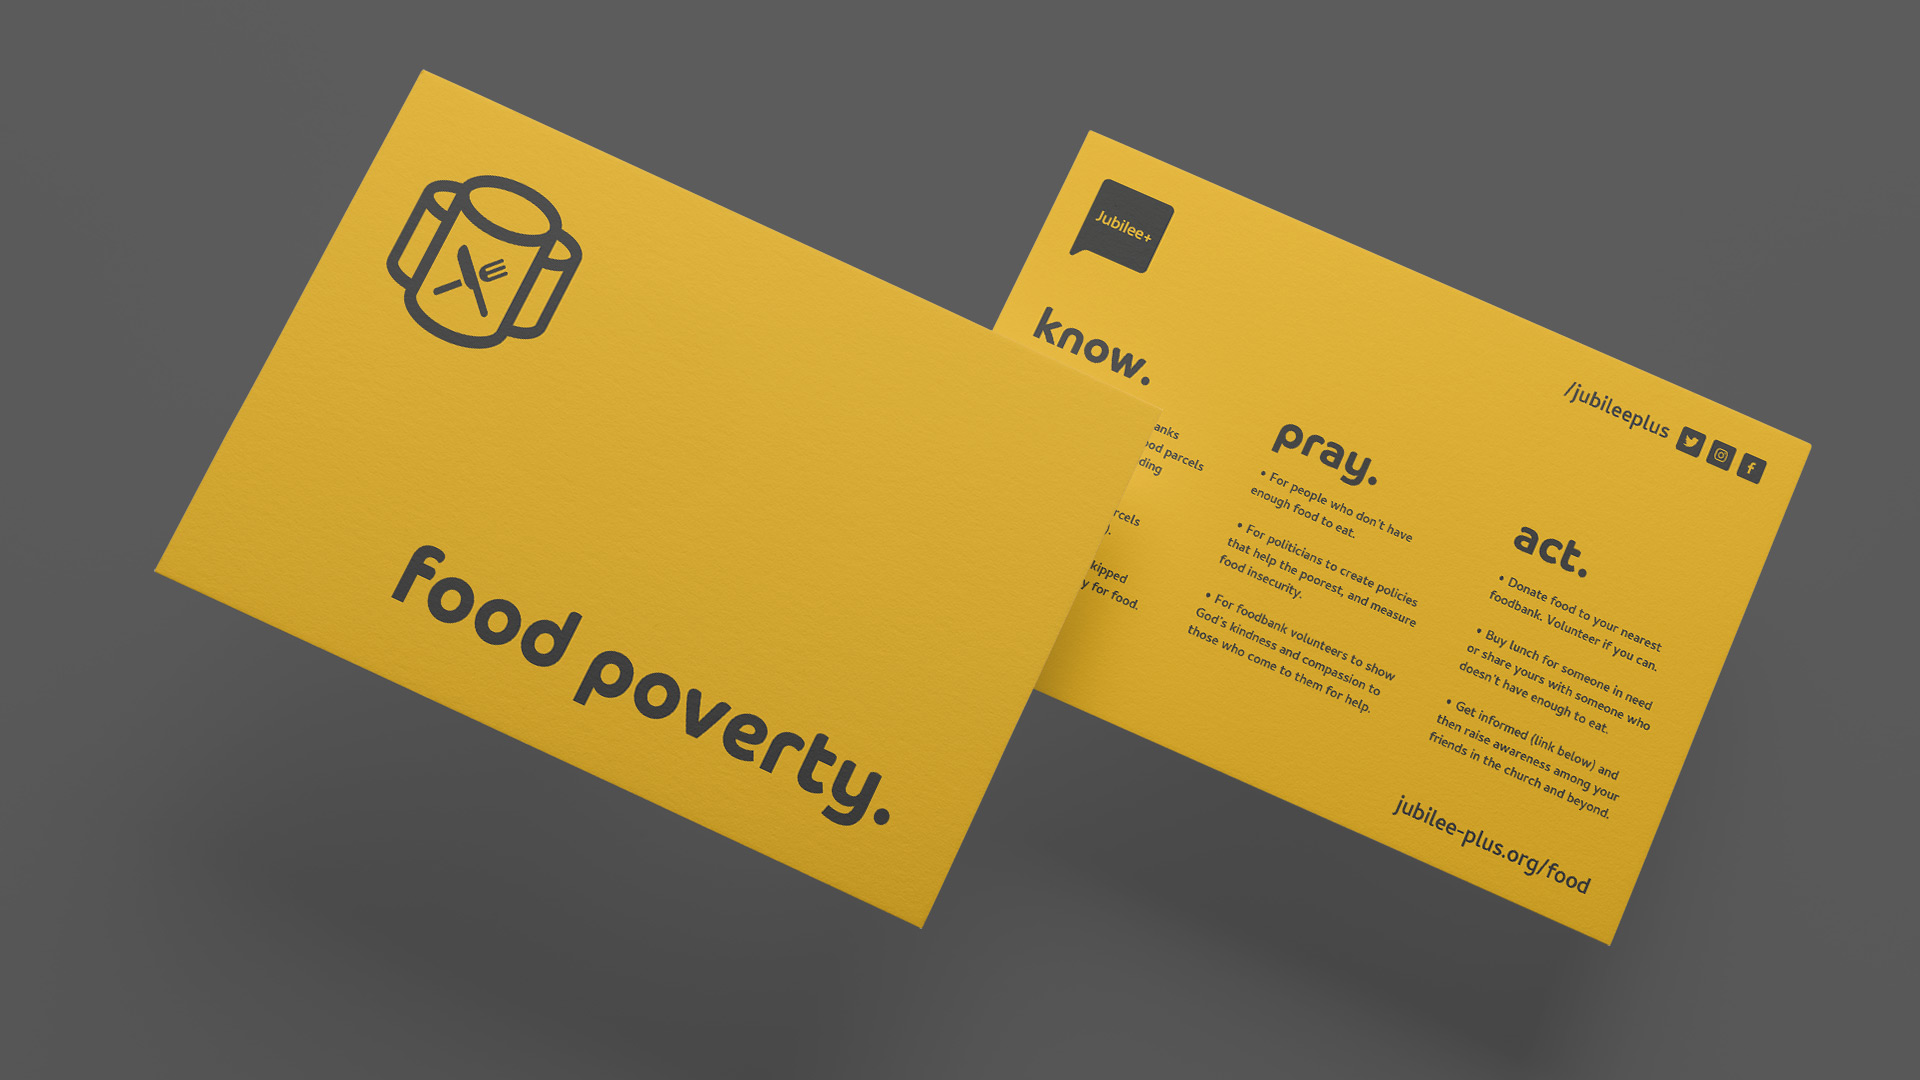 Jubilee+ Food Poverty information card